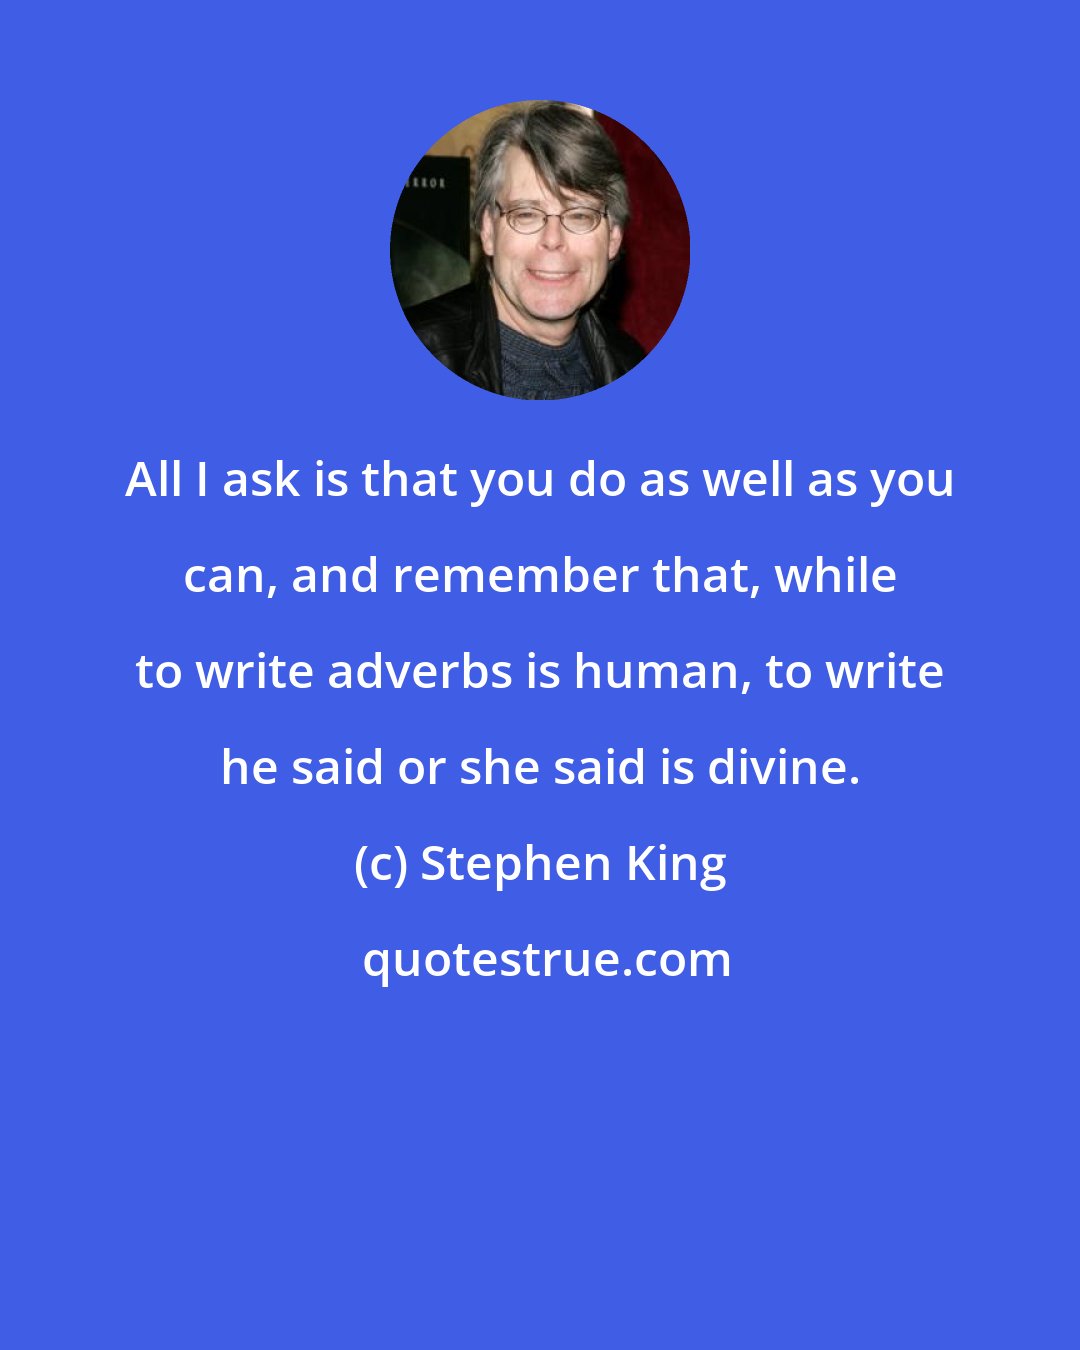 Stephen King: All I ask is that you do as well as you can, and remember that, while to write adverbs is human, to write he said or she said is divine.